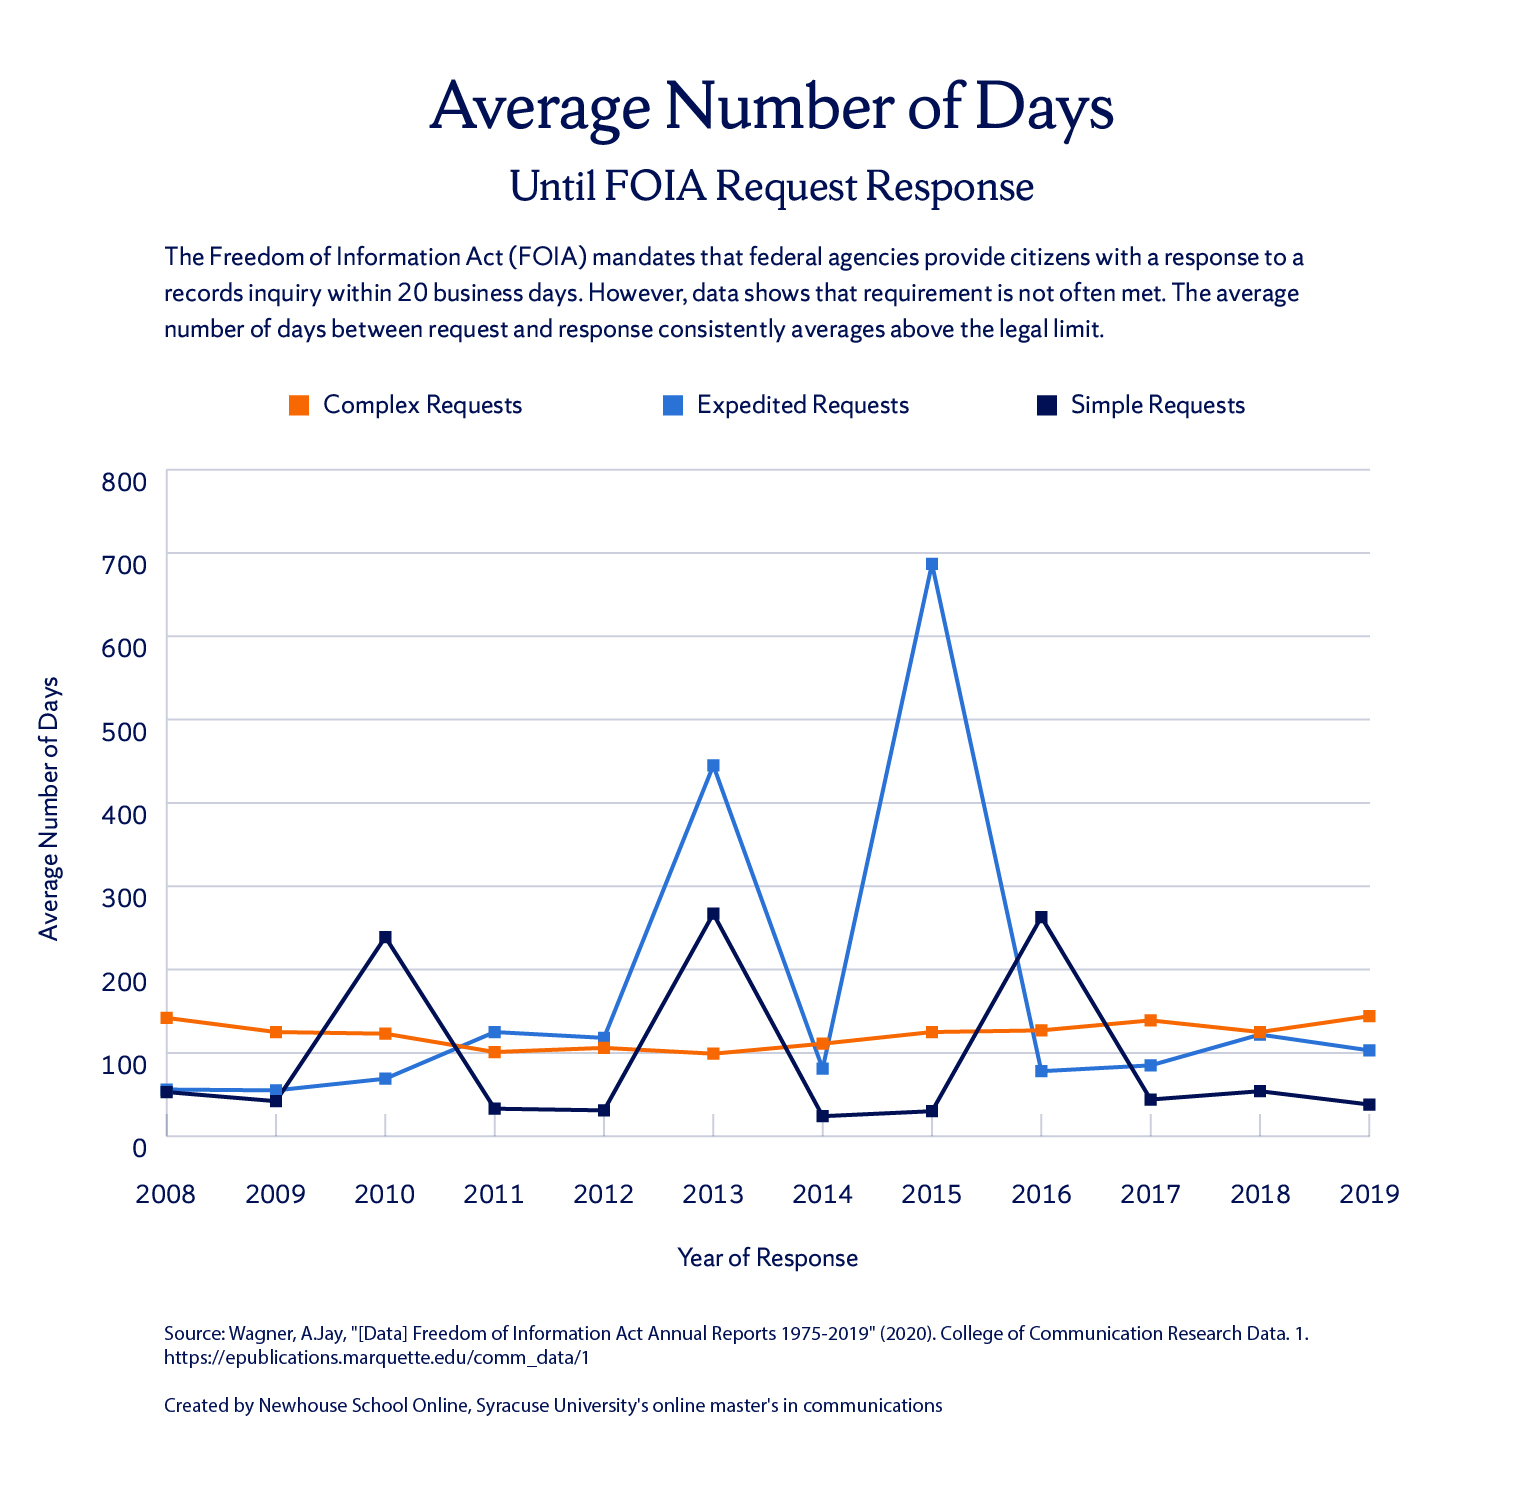 line graph of the average number of days until receiving a FOIA request response